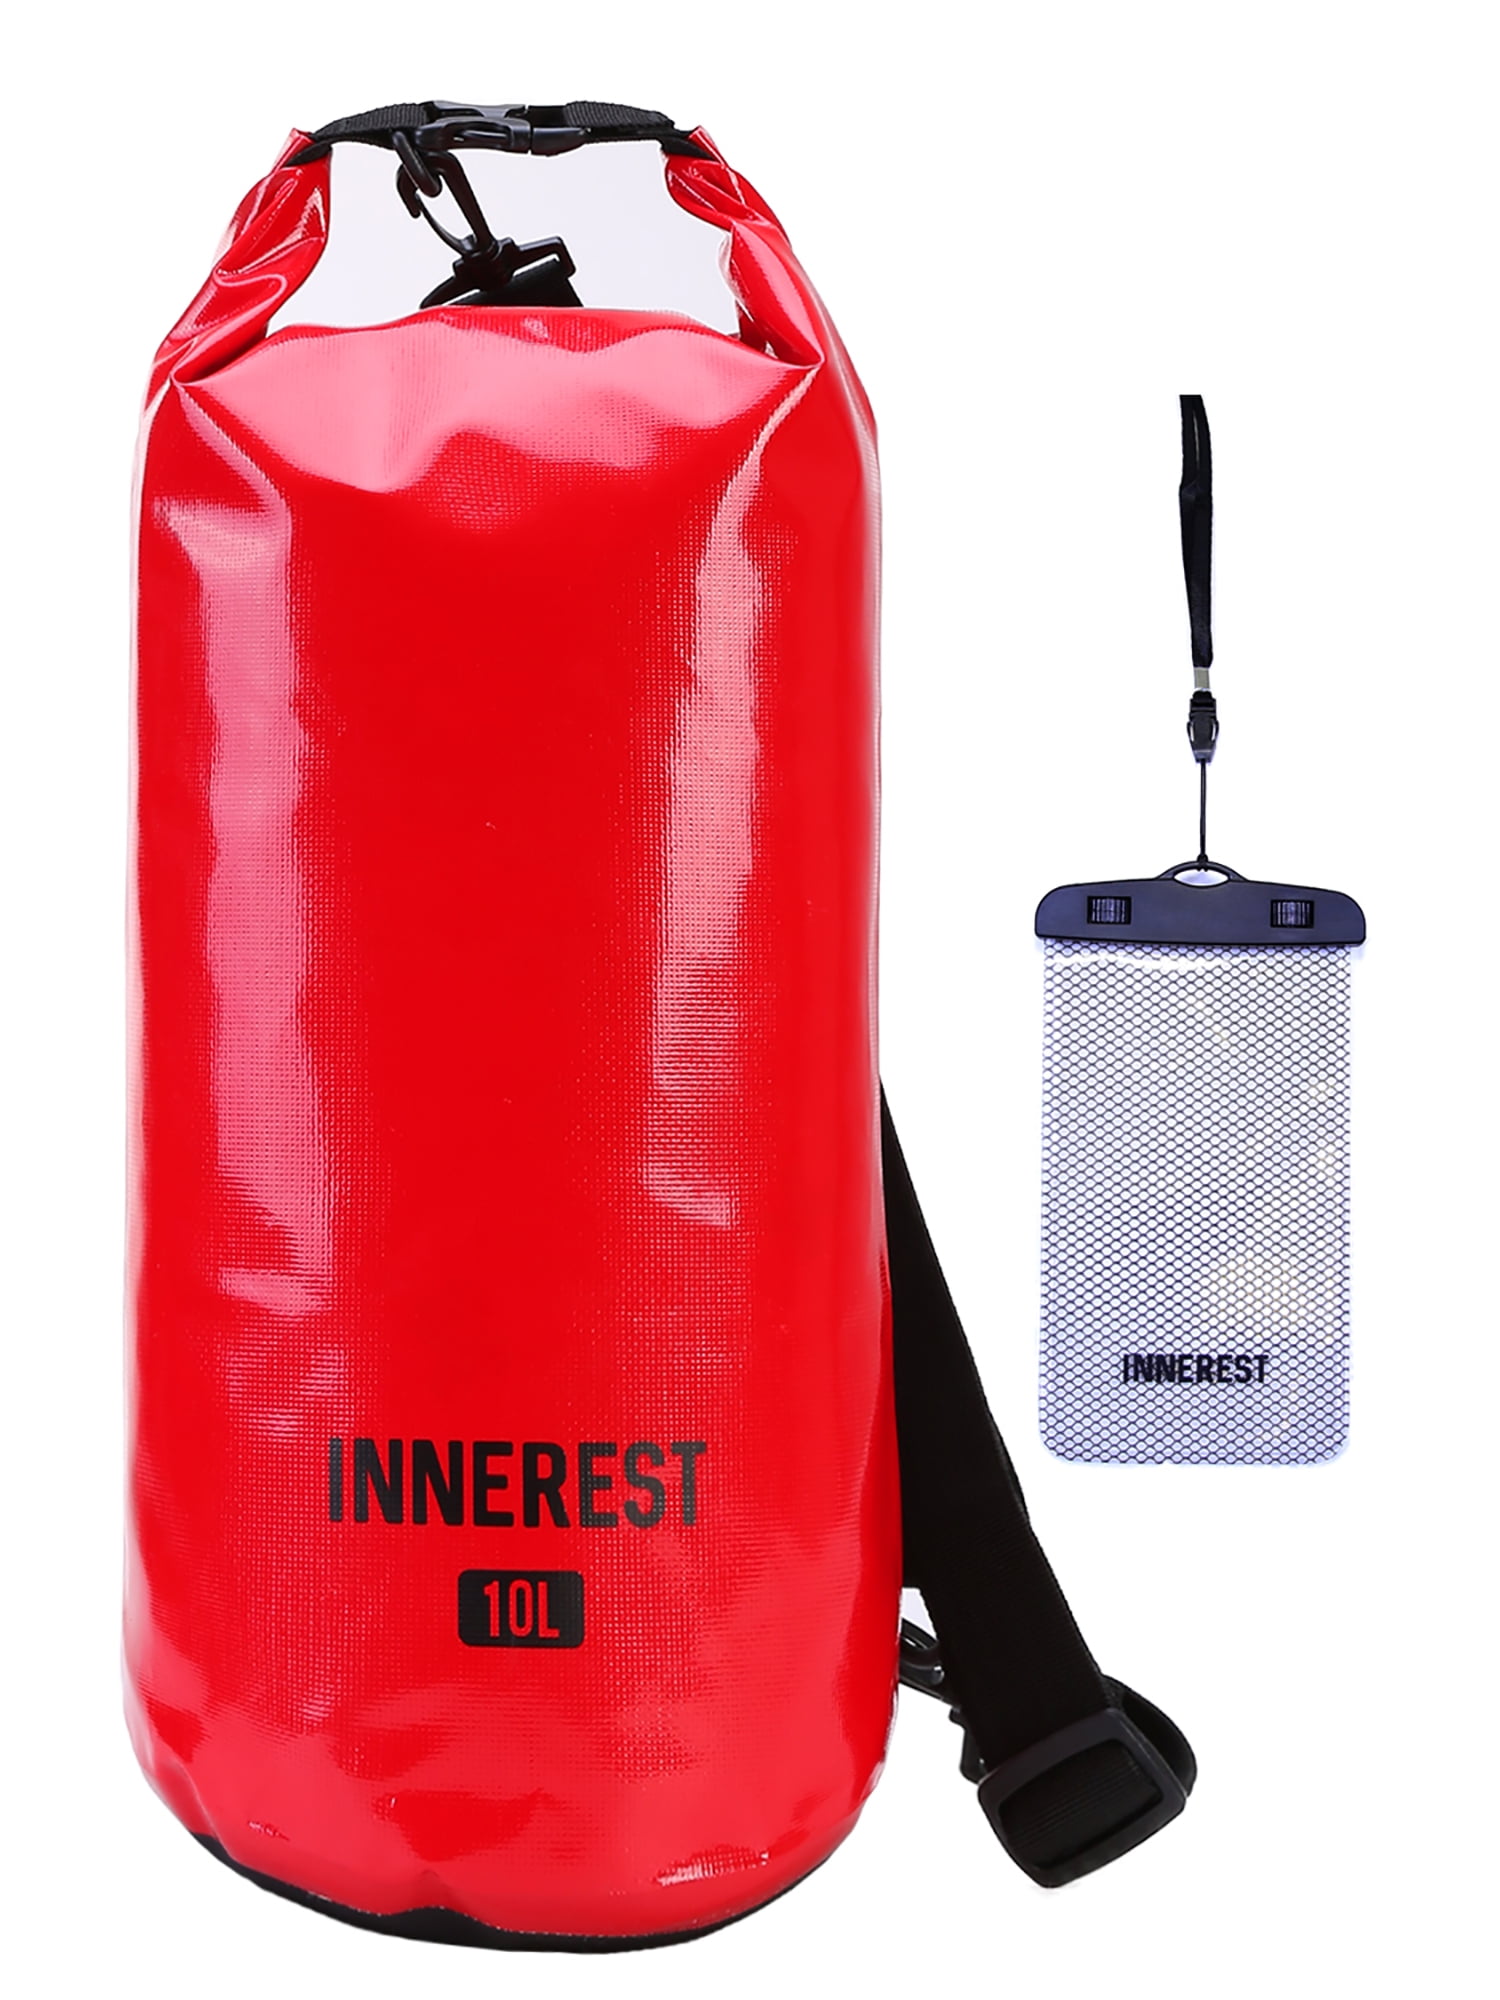 Innerest Waterproof Dry Bag Lightweight Sack for Outdoor Water Recreation Beach Boating Camping Fishing Kayaking with a